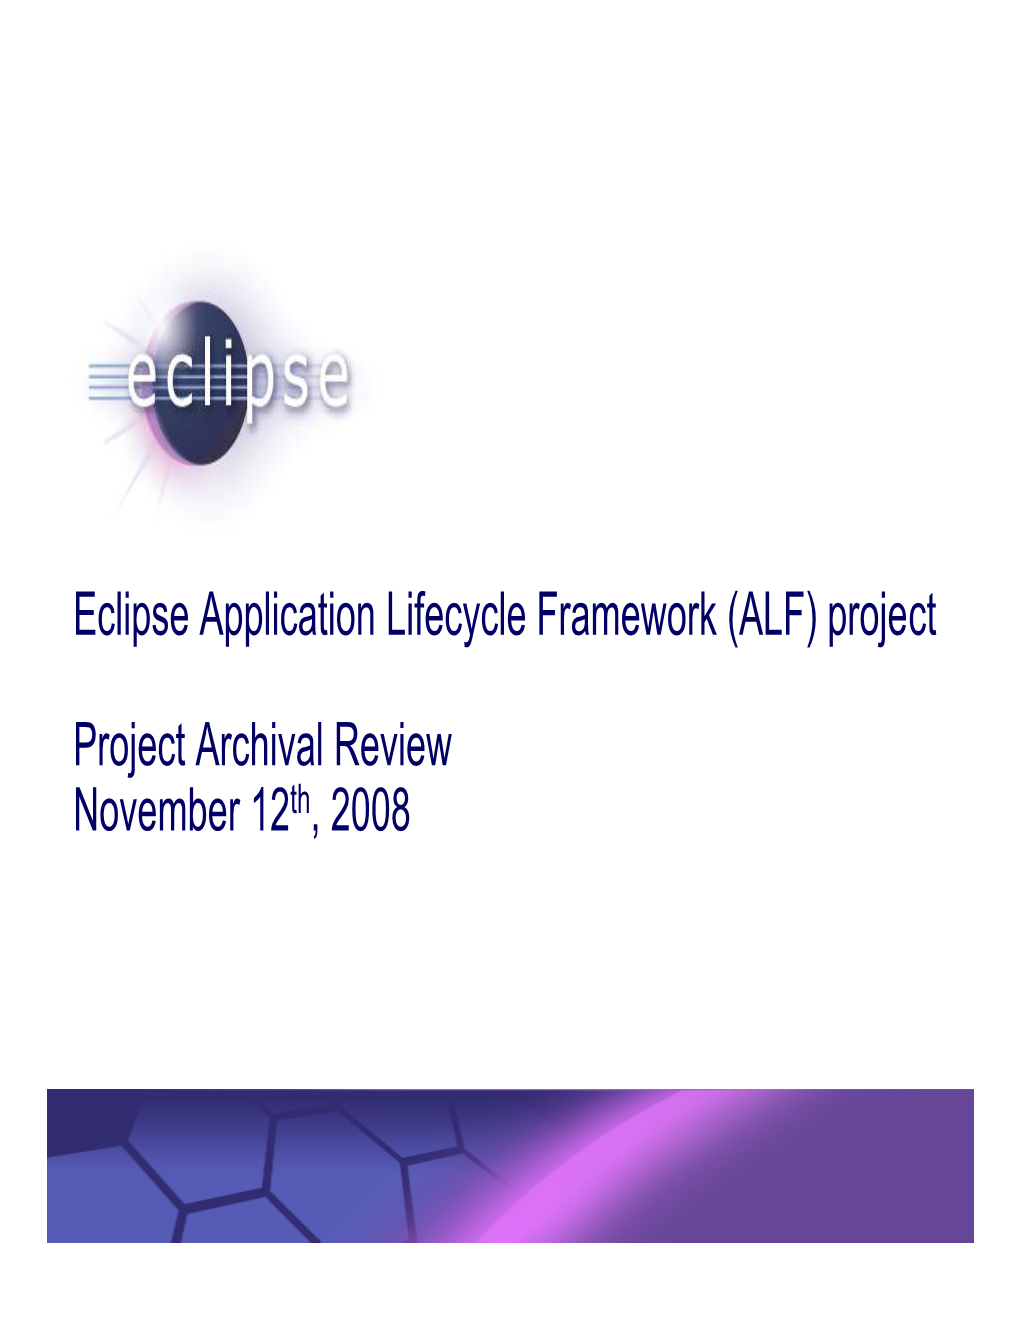 (ALF) Project Project Archival Review November 12Th, 2008